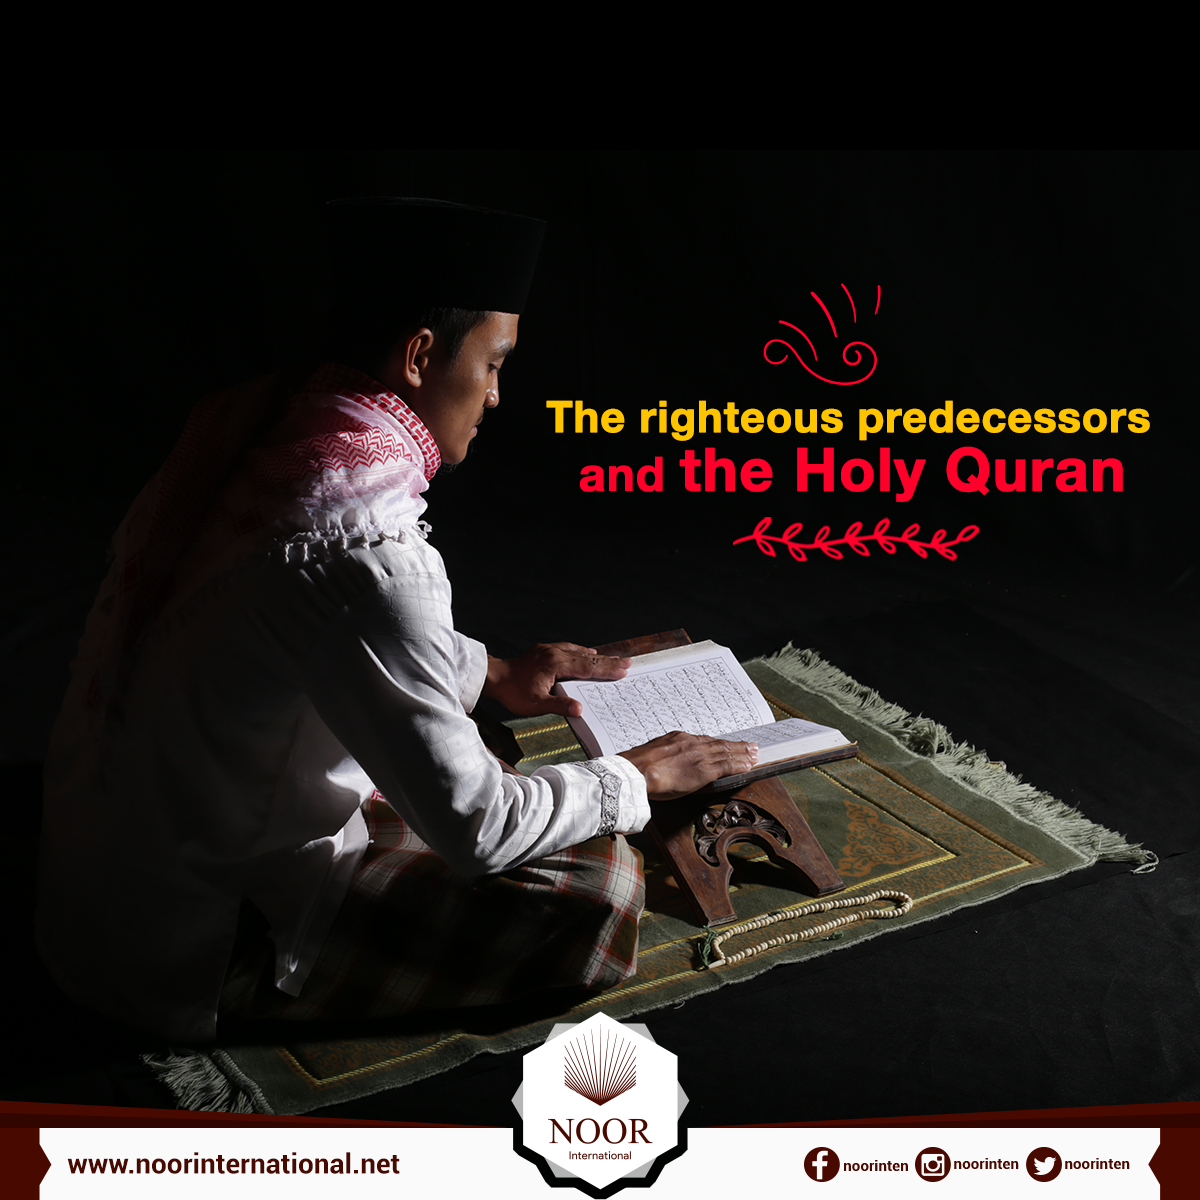 The righteous predecessors and the Holy Quran